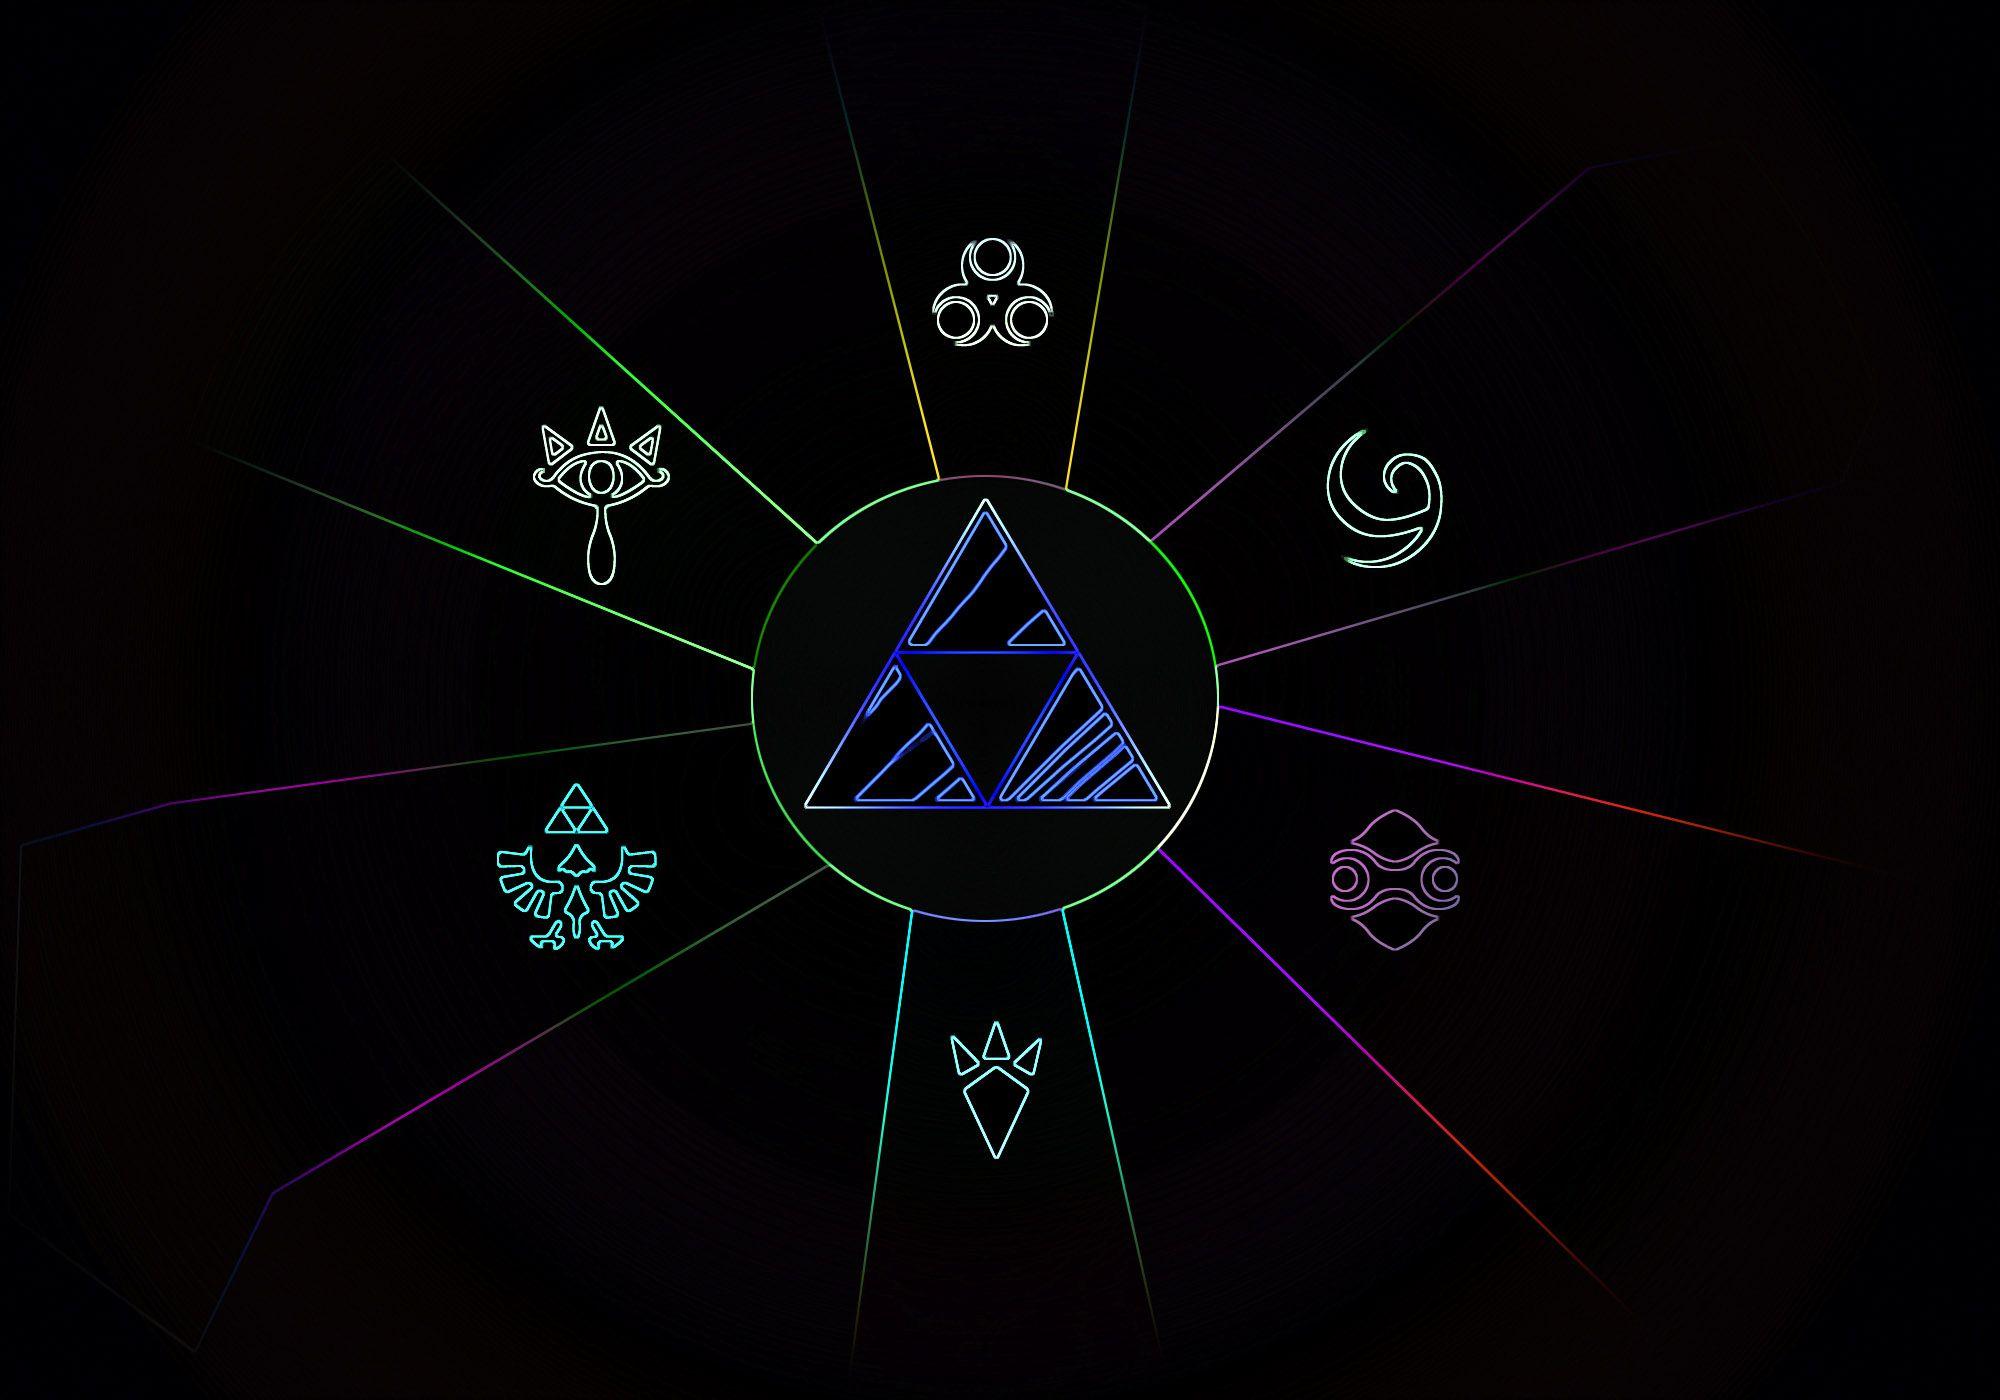 Wallpaper ID: 556432 / design, internet, video games, social networking,  The Legend of Zelda, global communications, cooperation, geometric shape,  Triforce, nature, technology free download